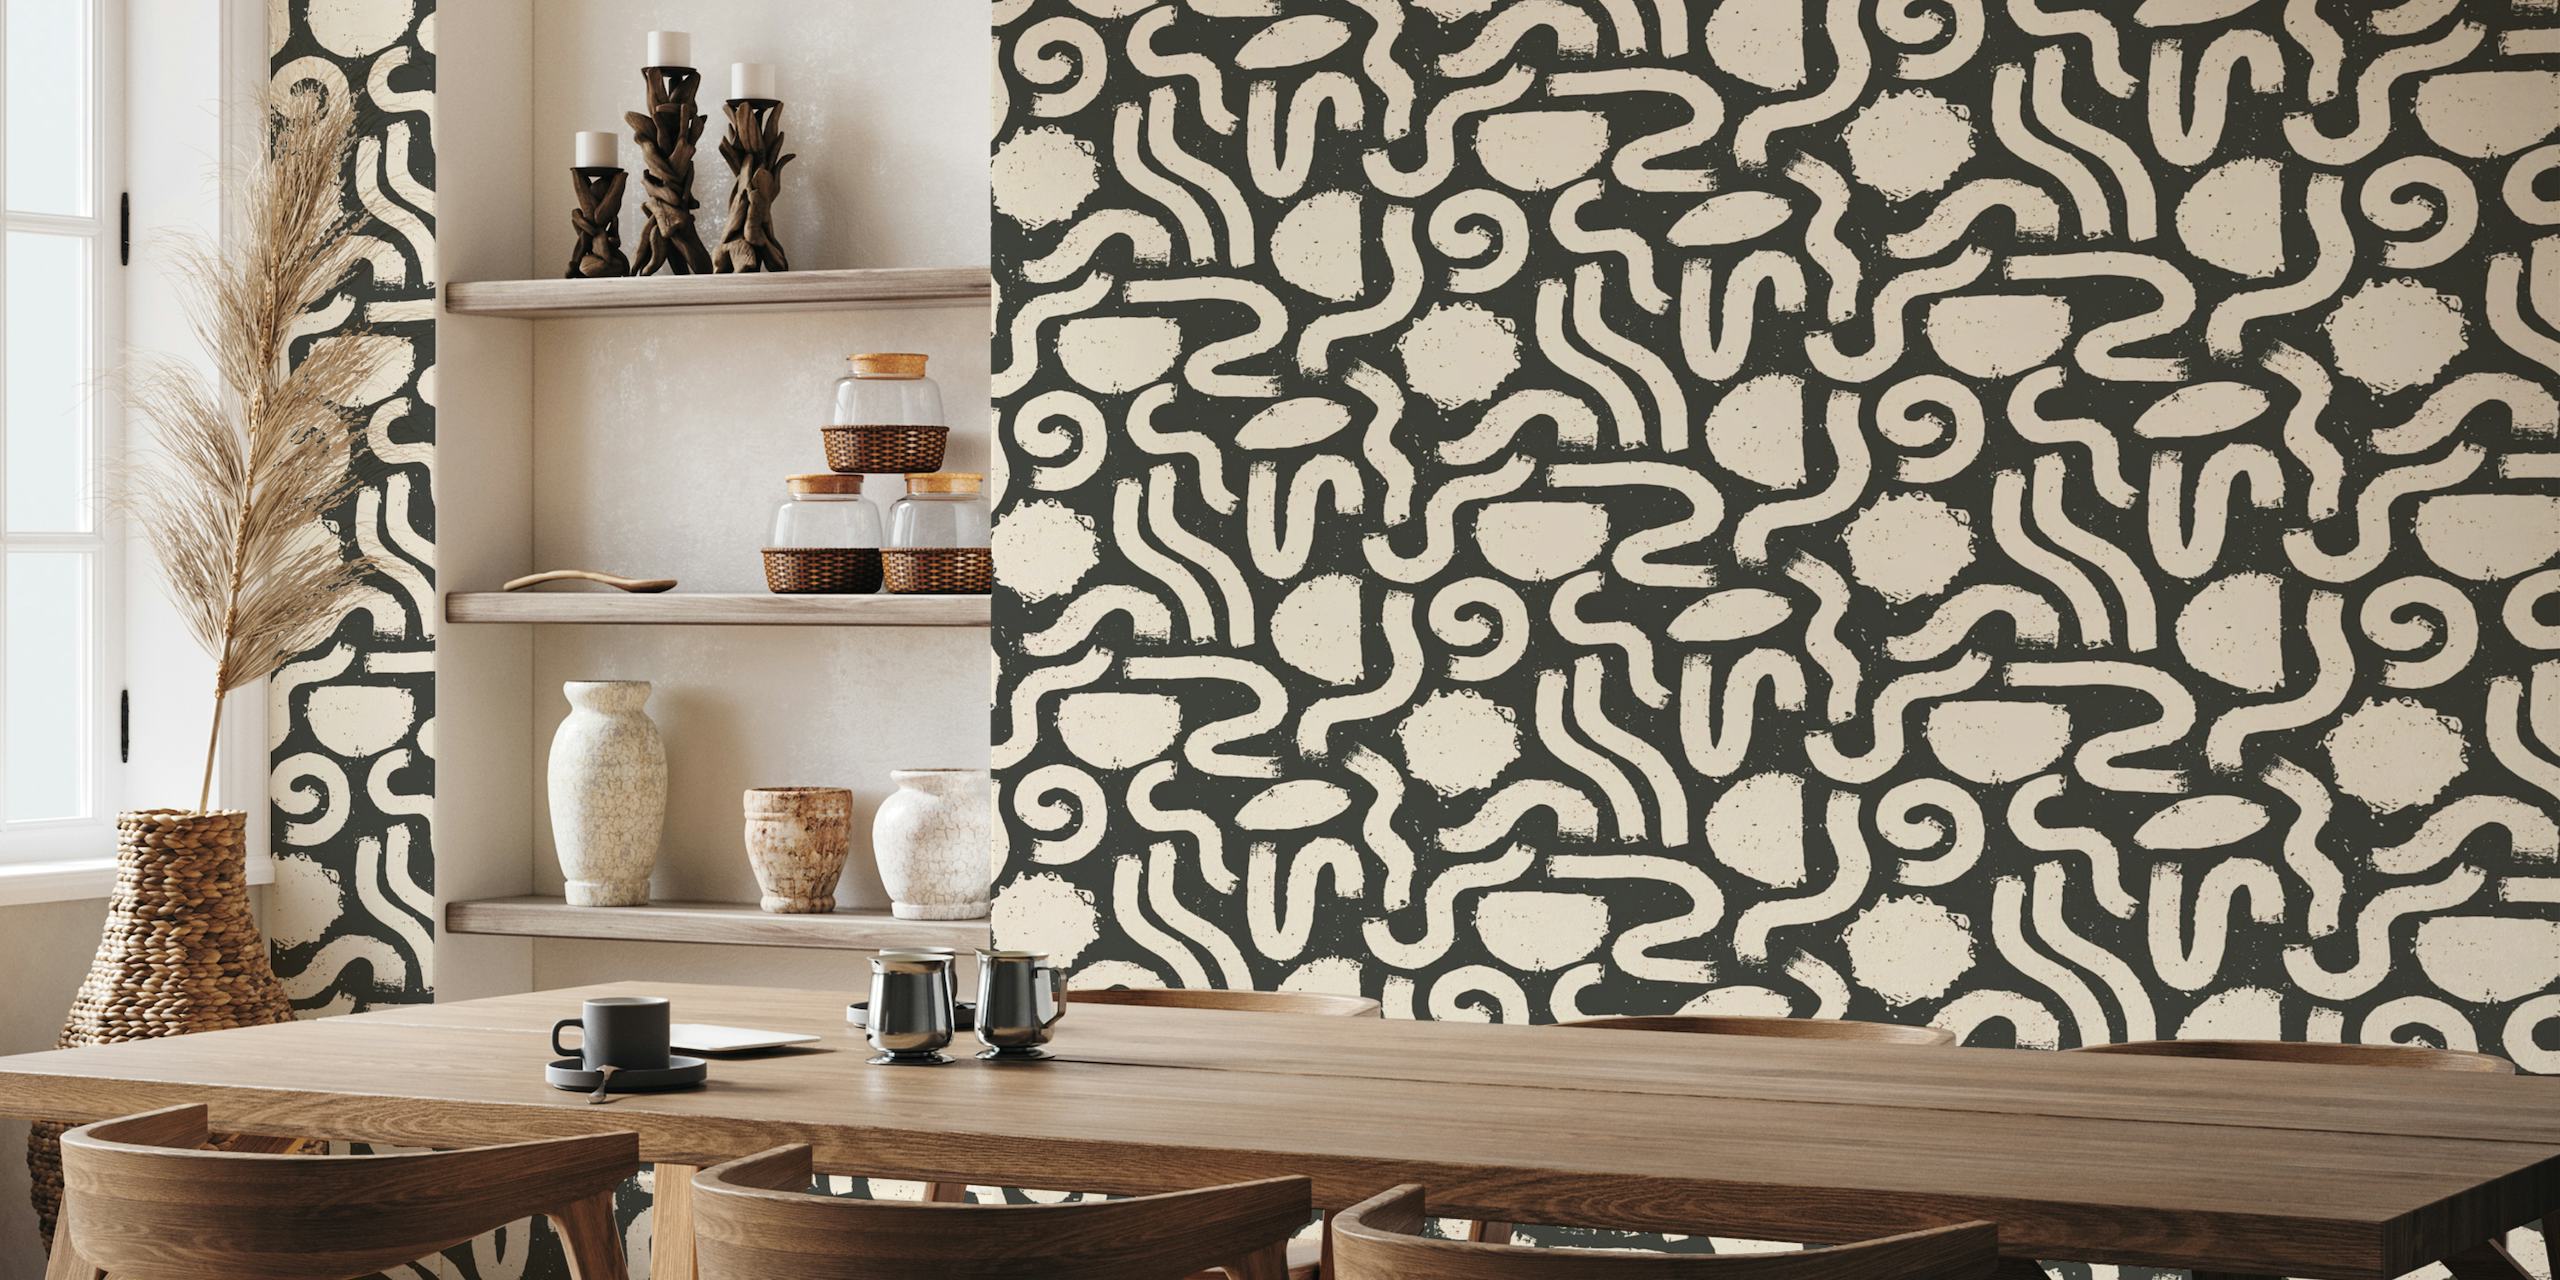 Painted Shapes Black and Peach Pattern wallpaper